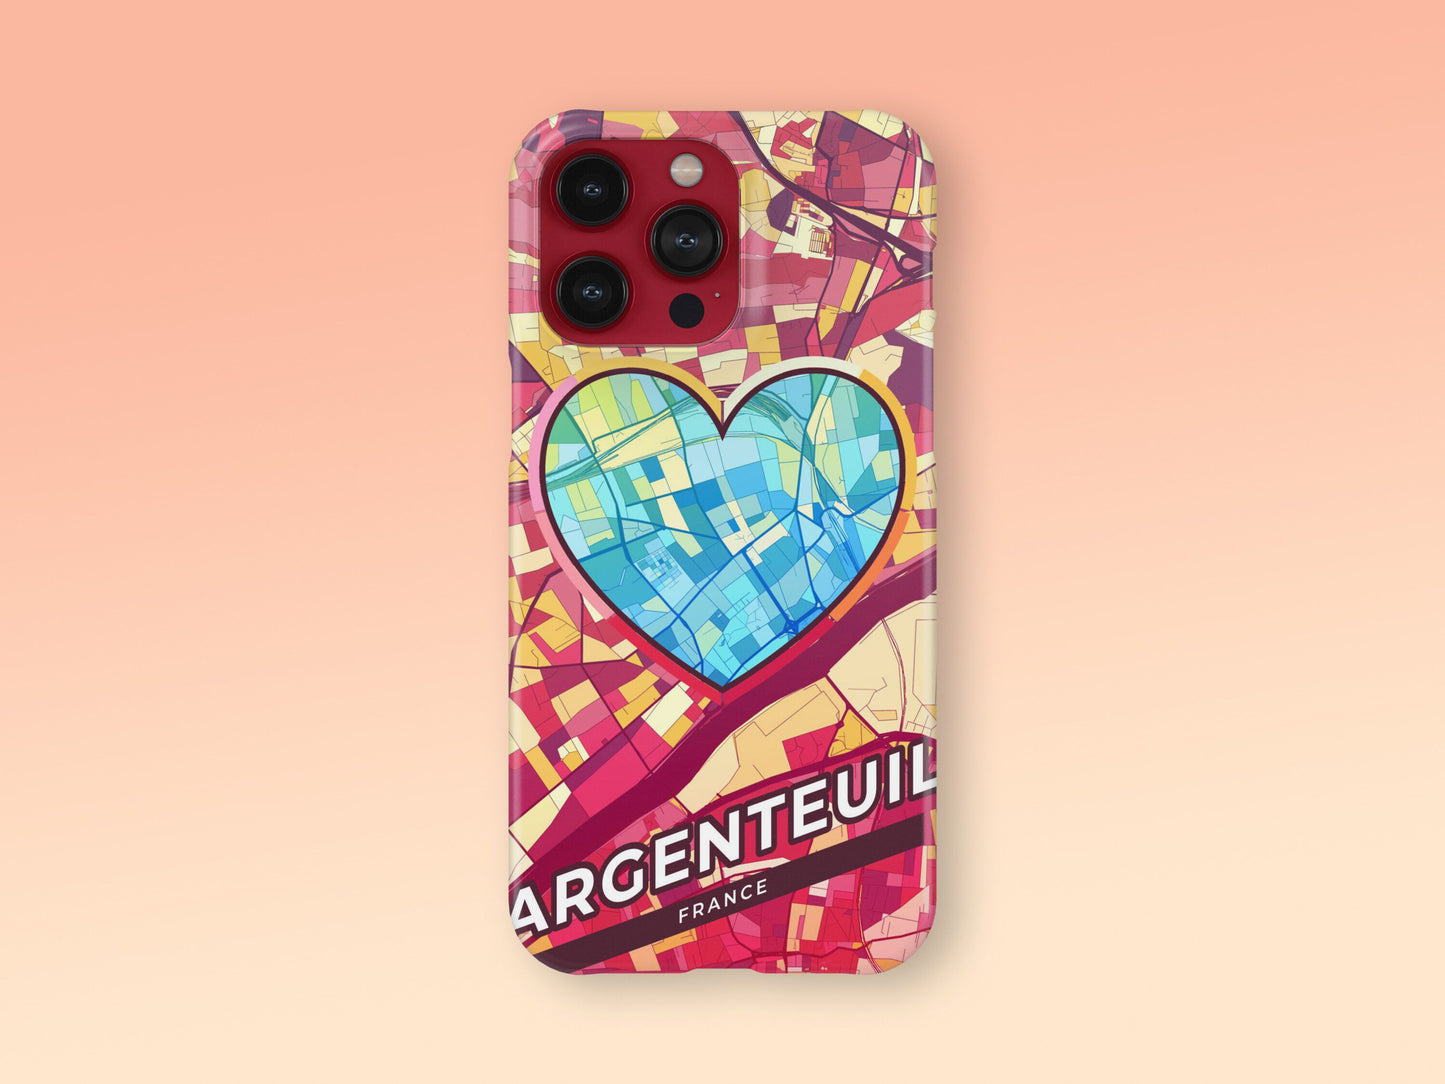 Argenteuil France slim phone case with colorful icon. Birthday, wedding or housewarming gift. Couple match cases. 2